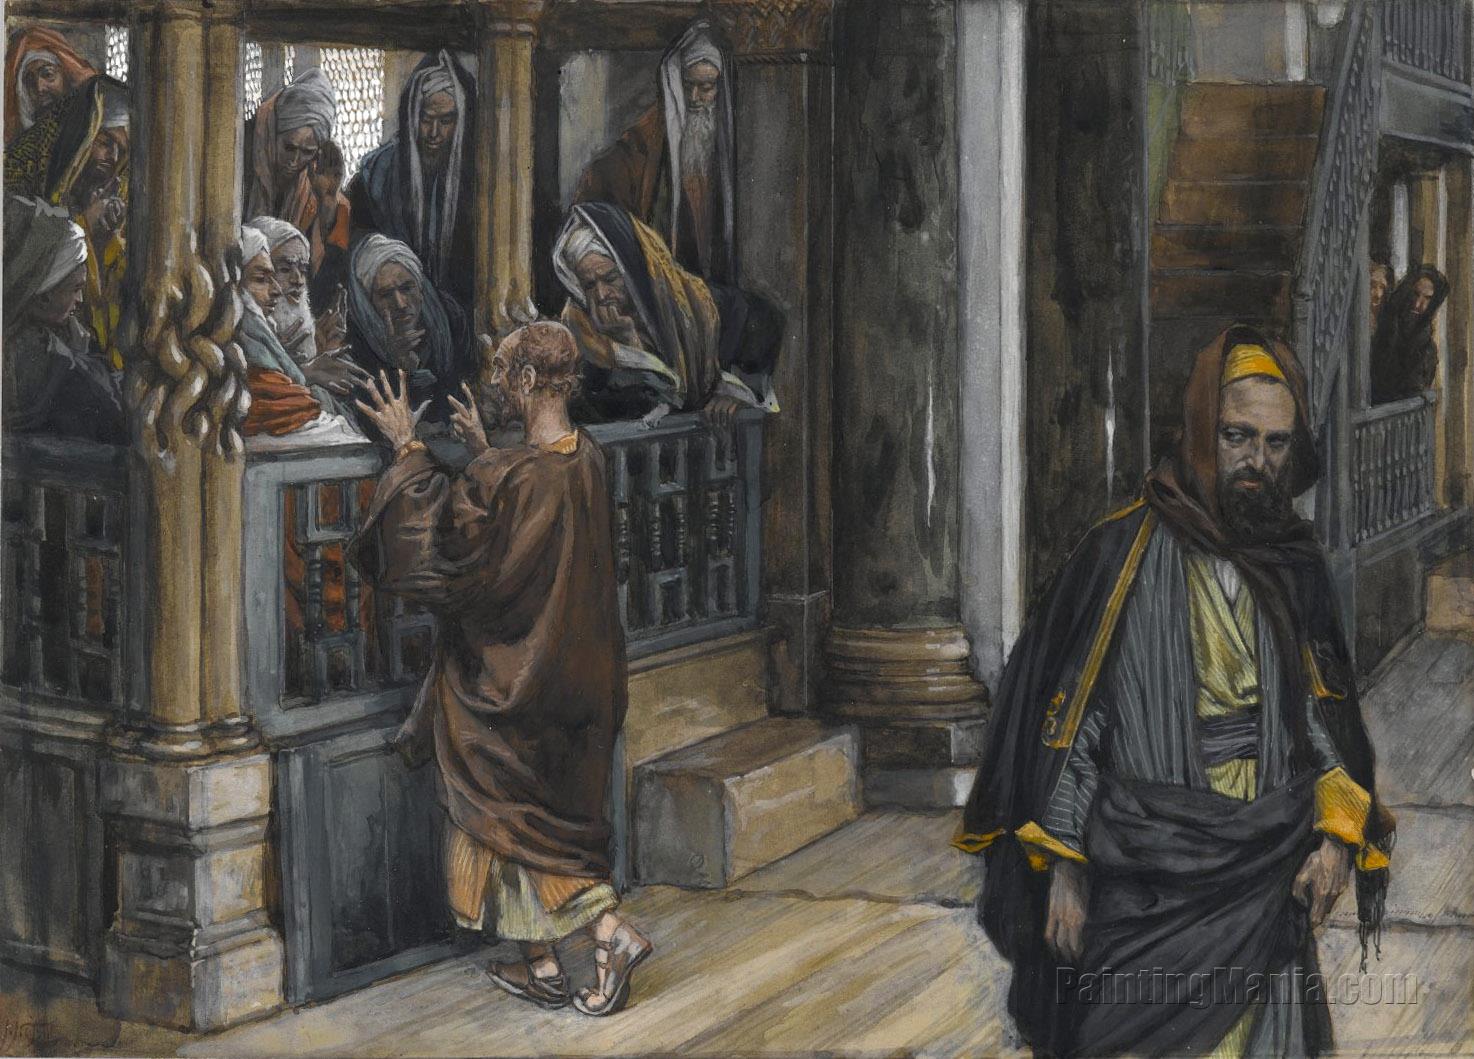 Judas Goes to Find the Jews